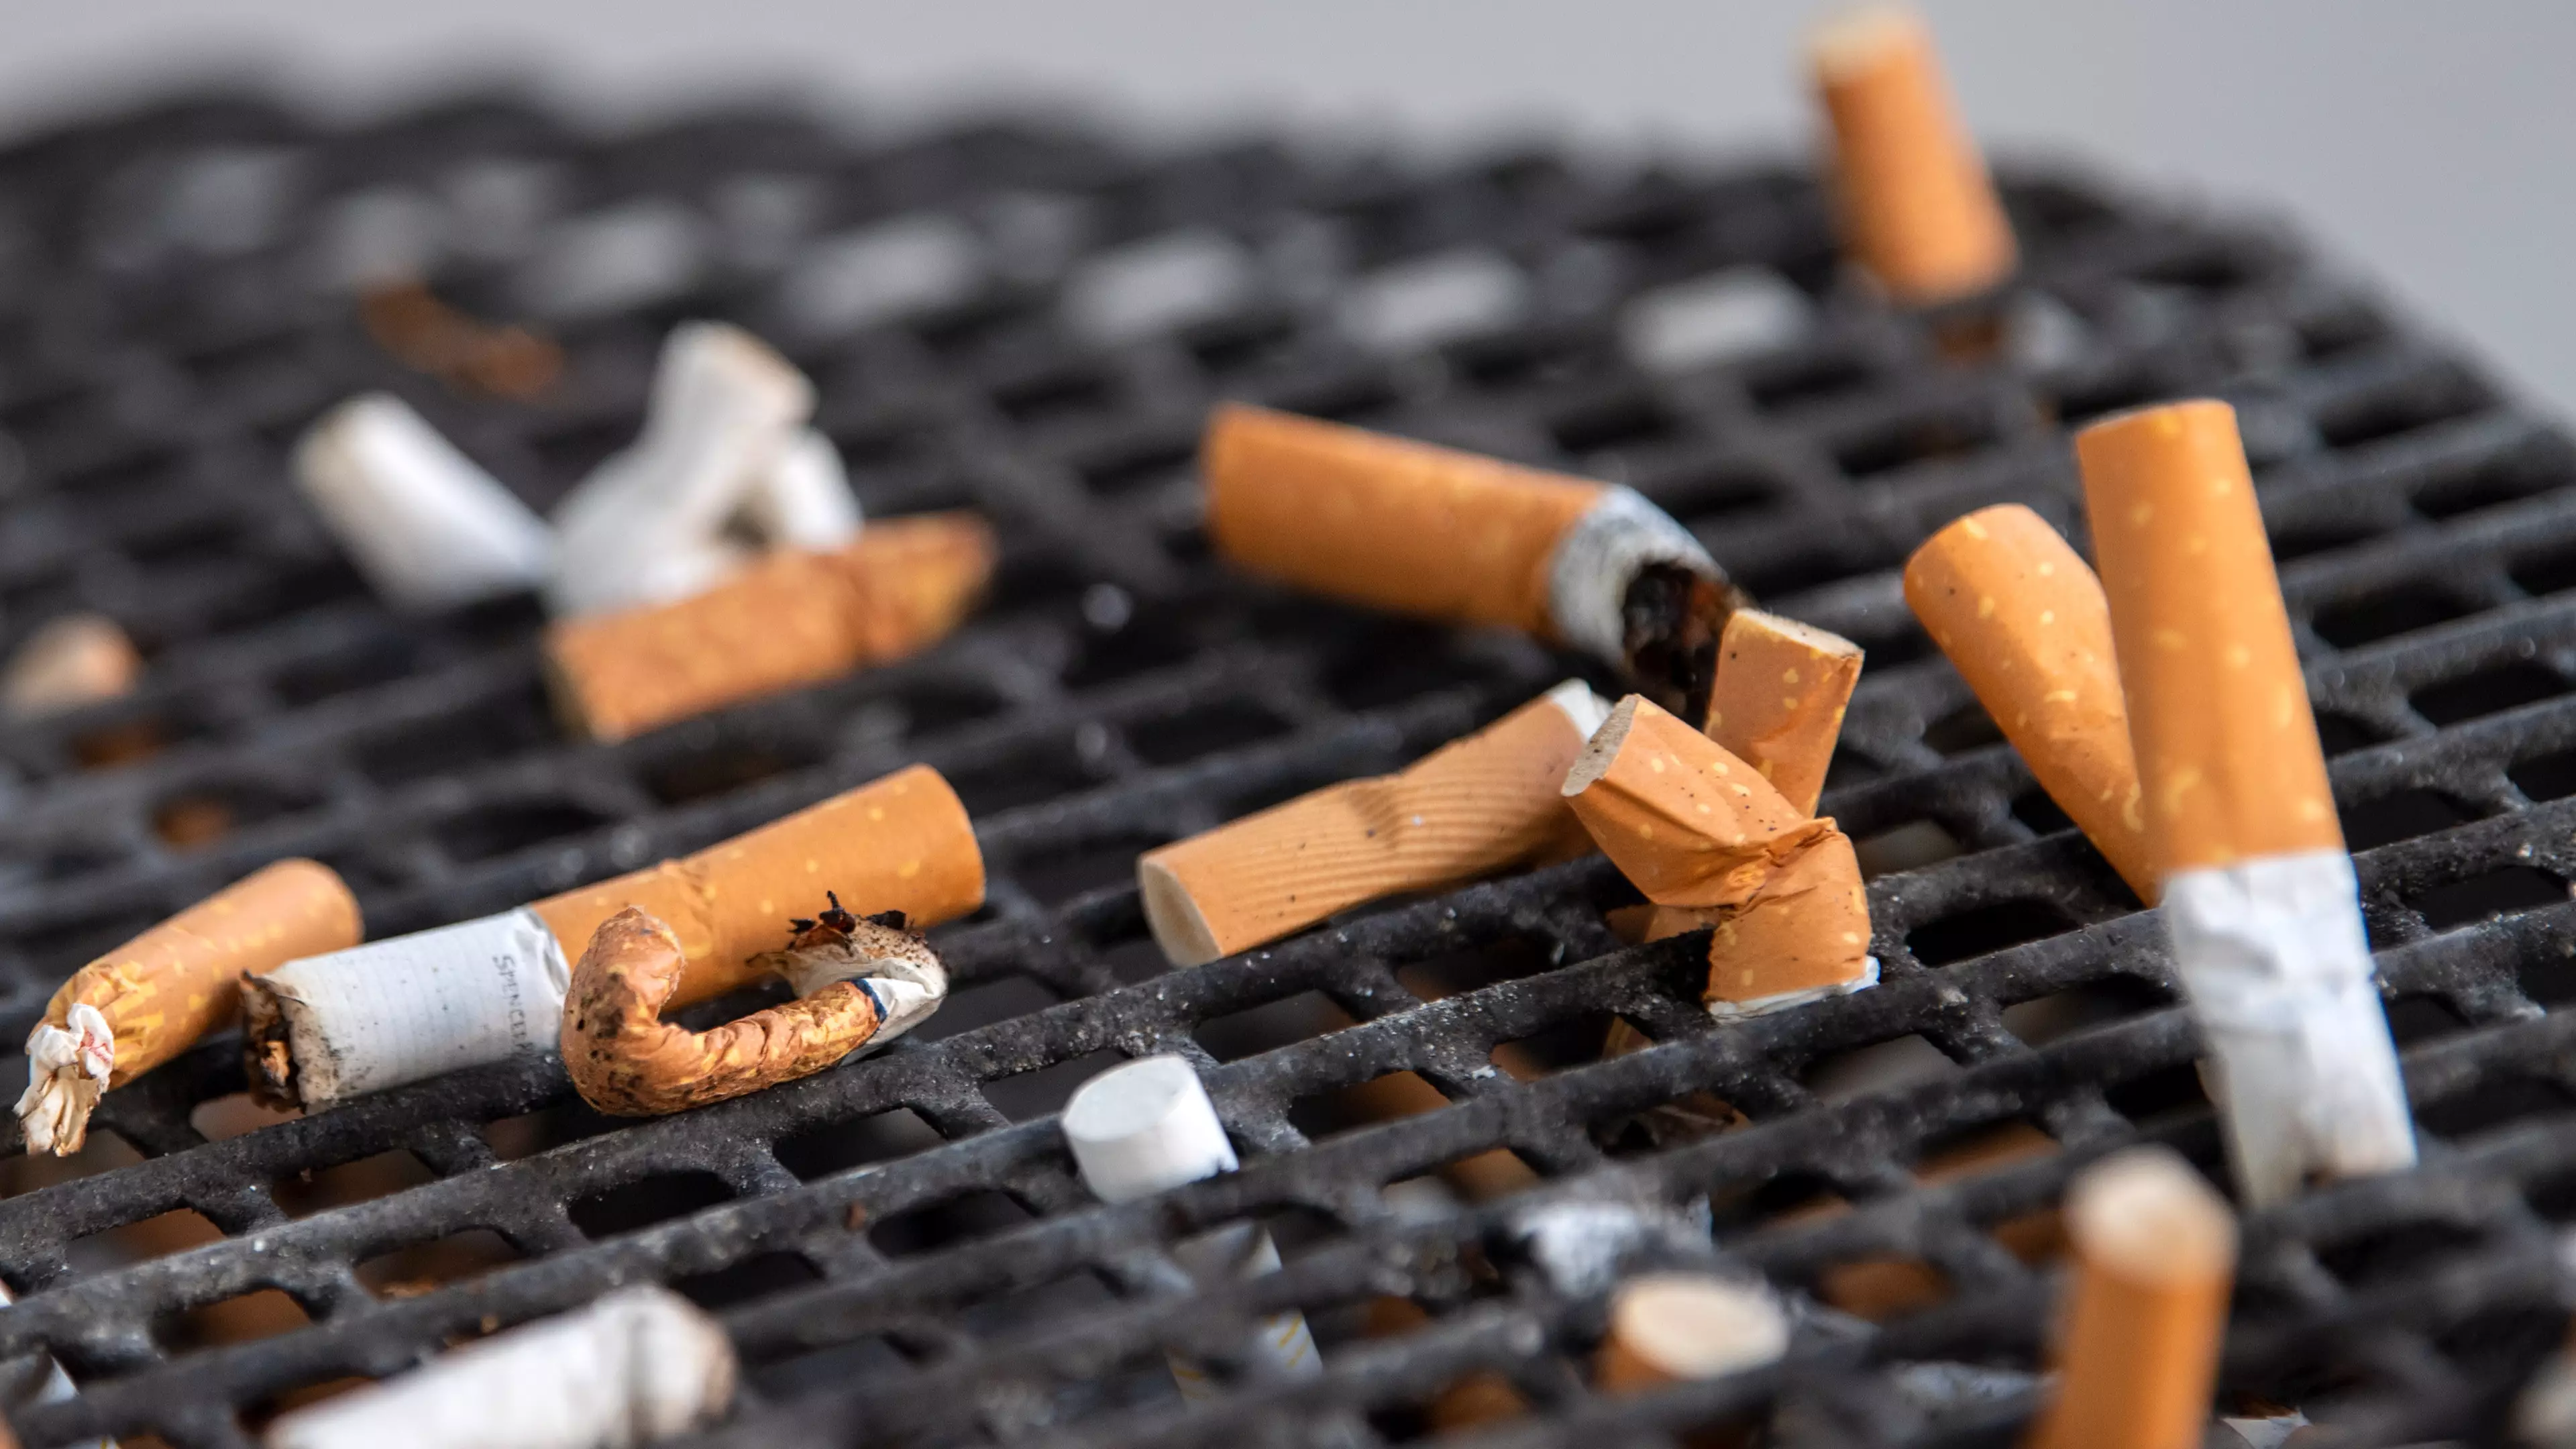 ​UK Cigarette Prices Will Rise From 6pm Today, Government Announces